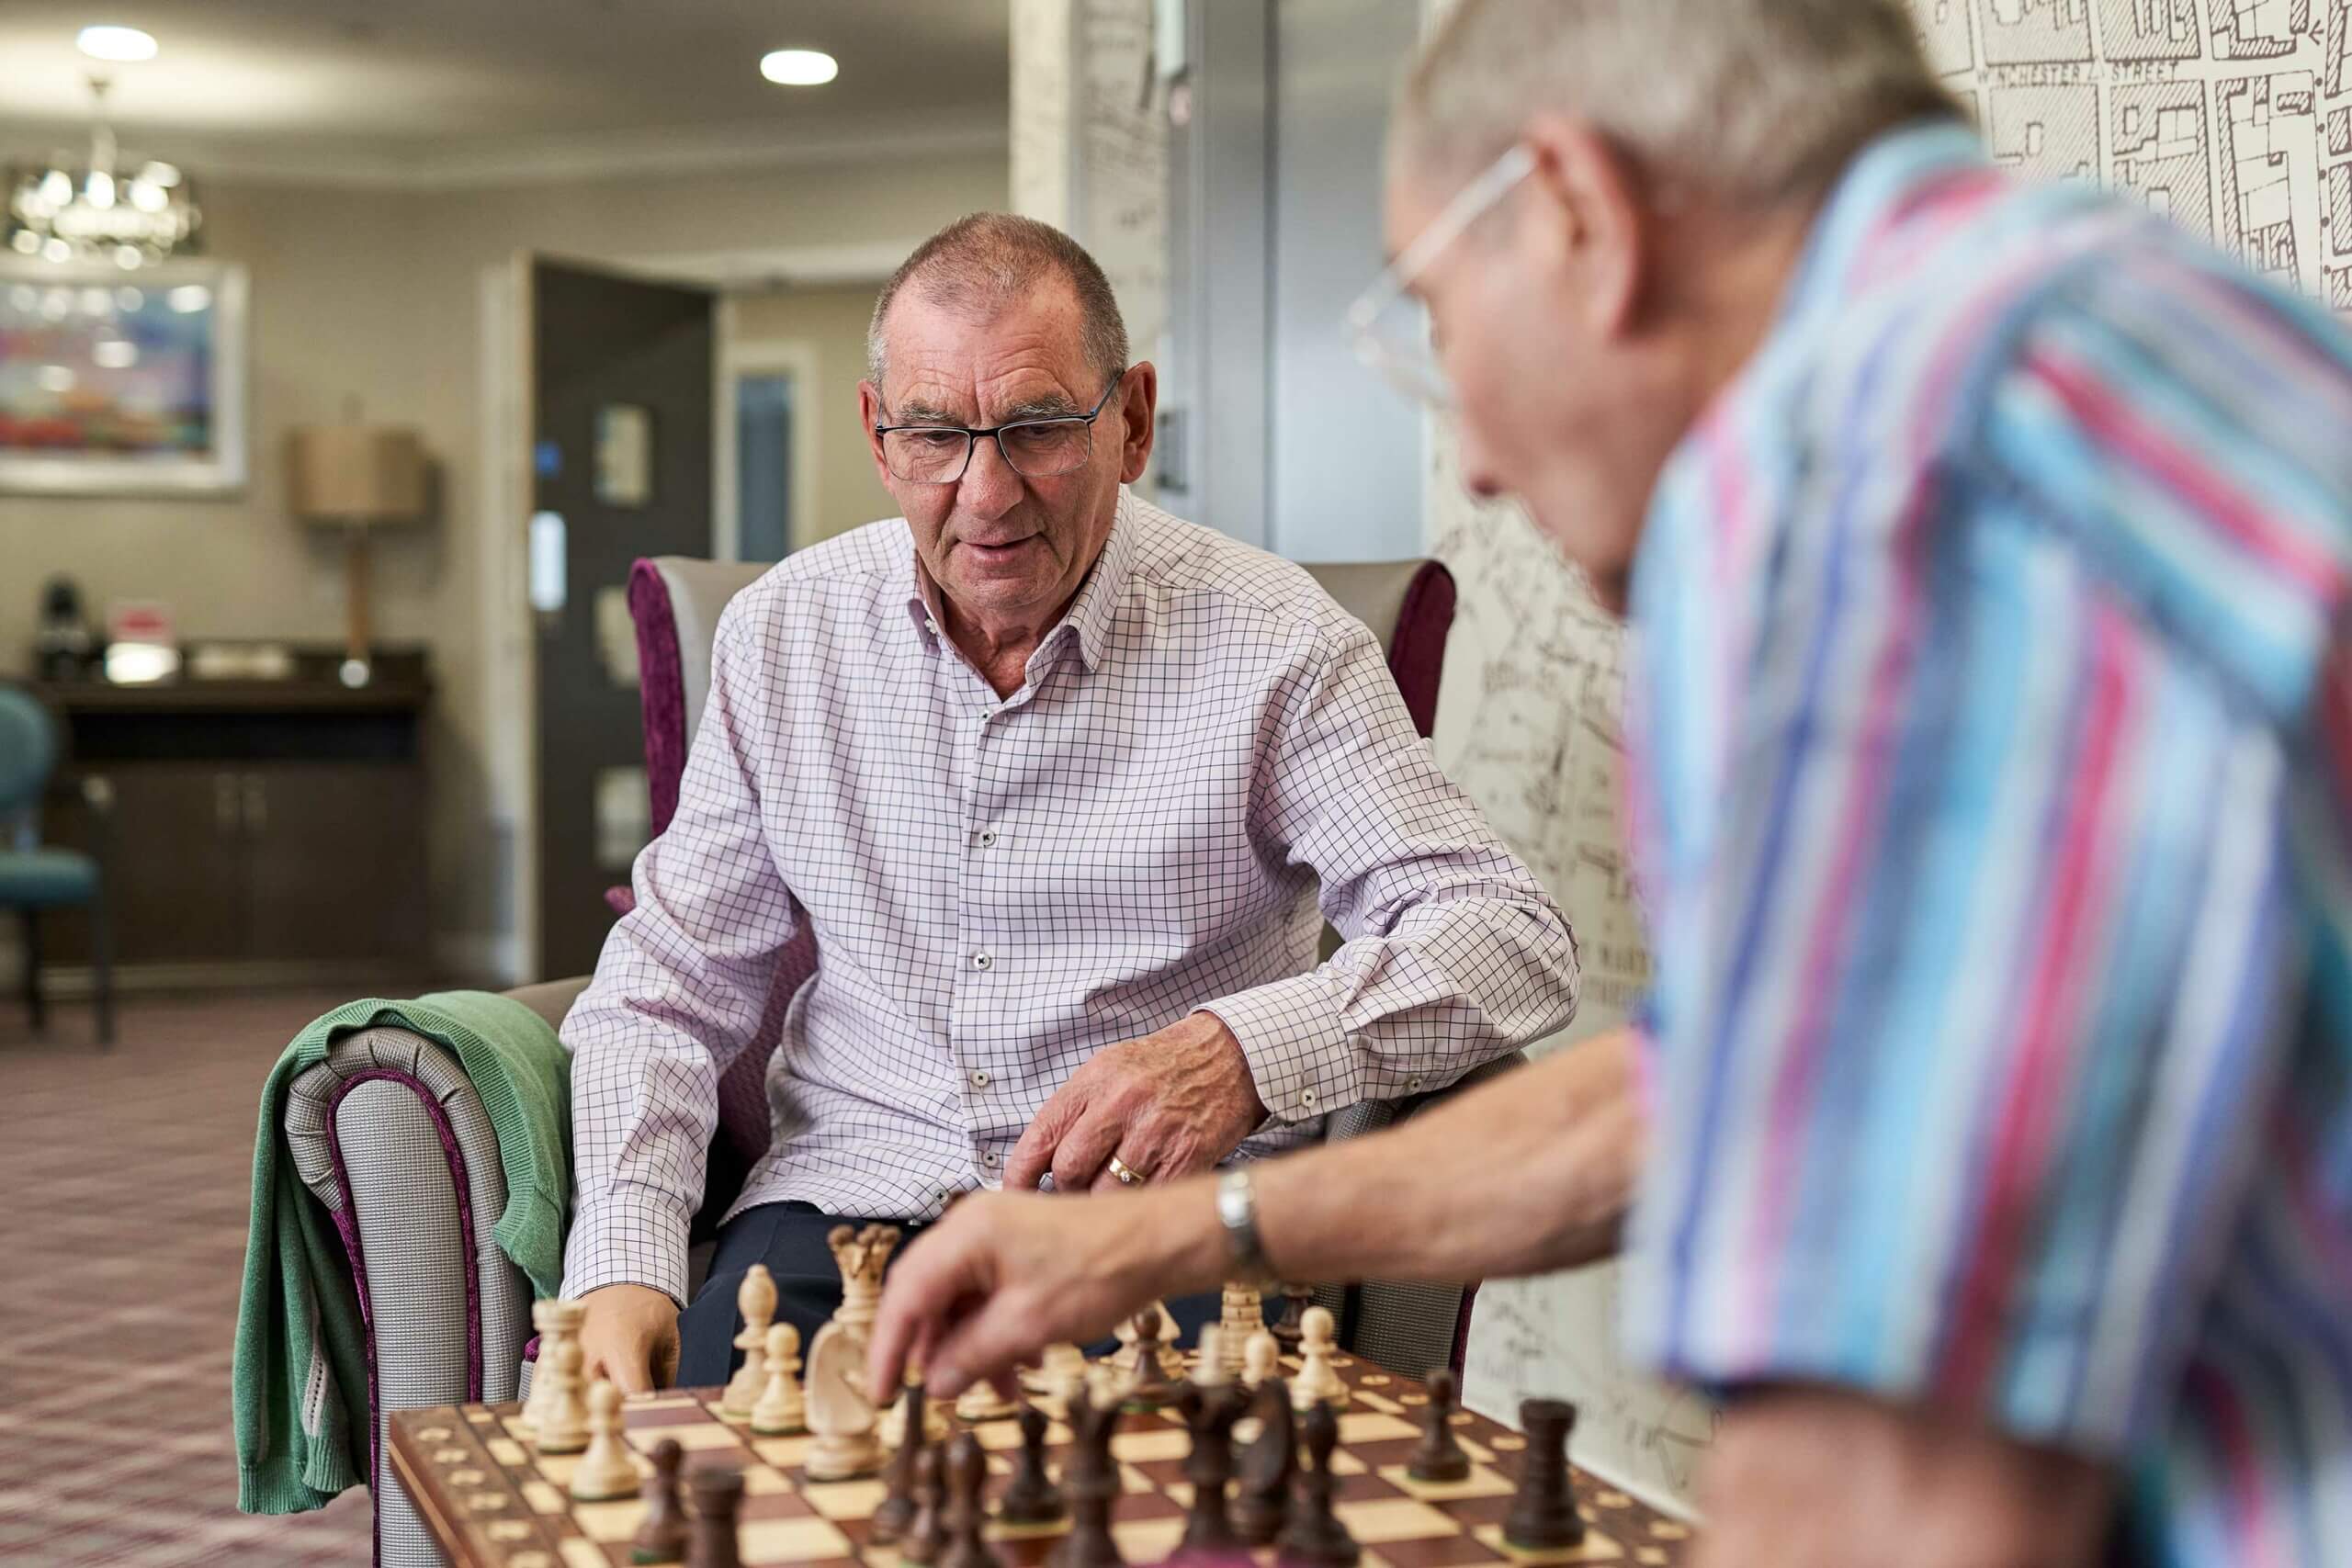 The early signs of dementia The Mayfield Care Home